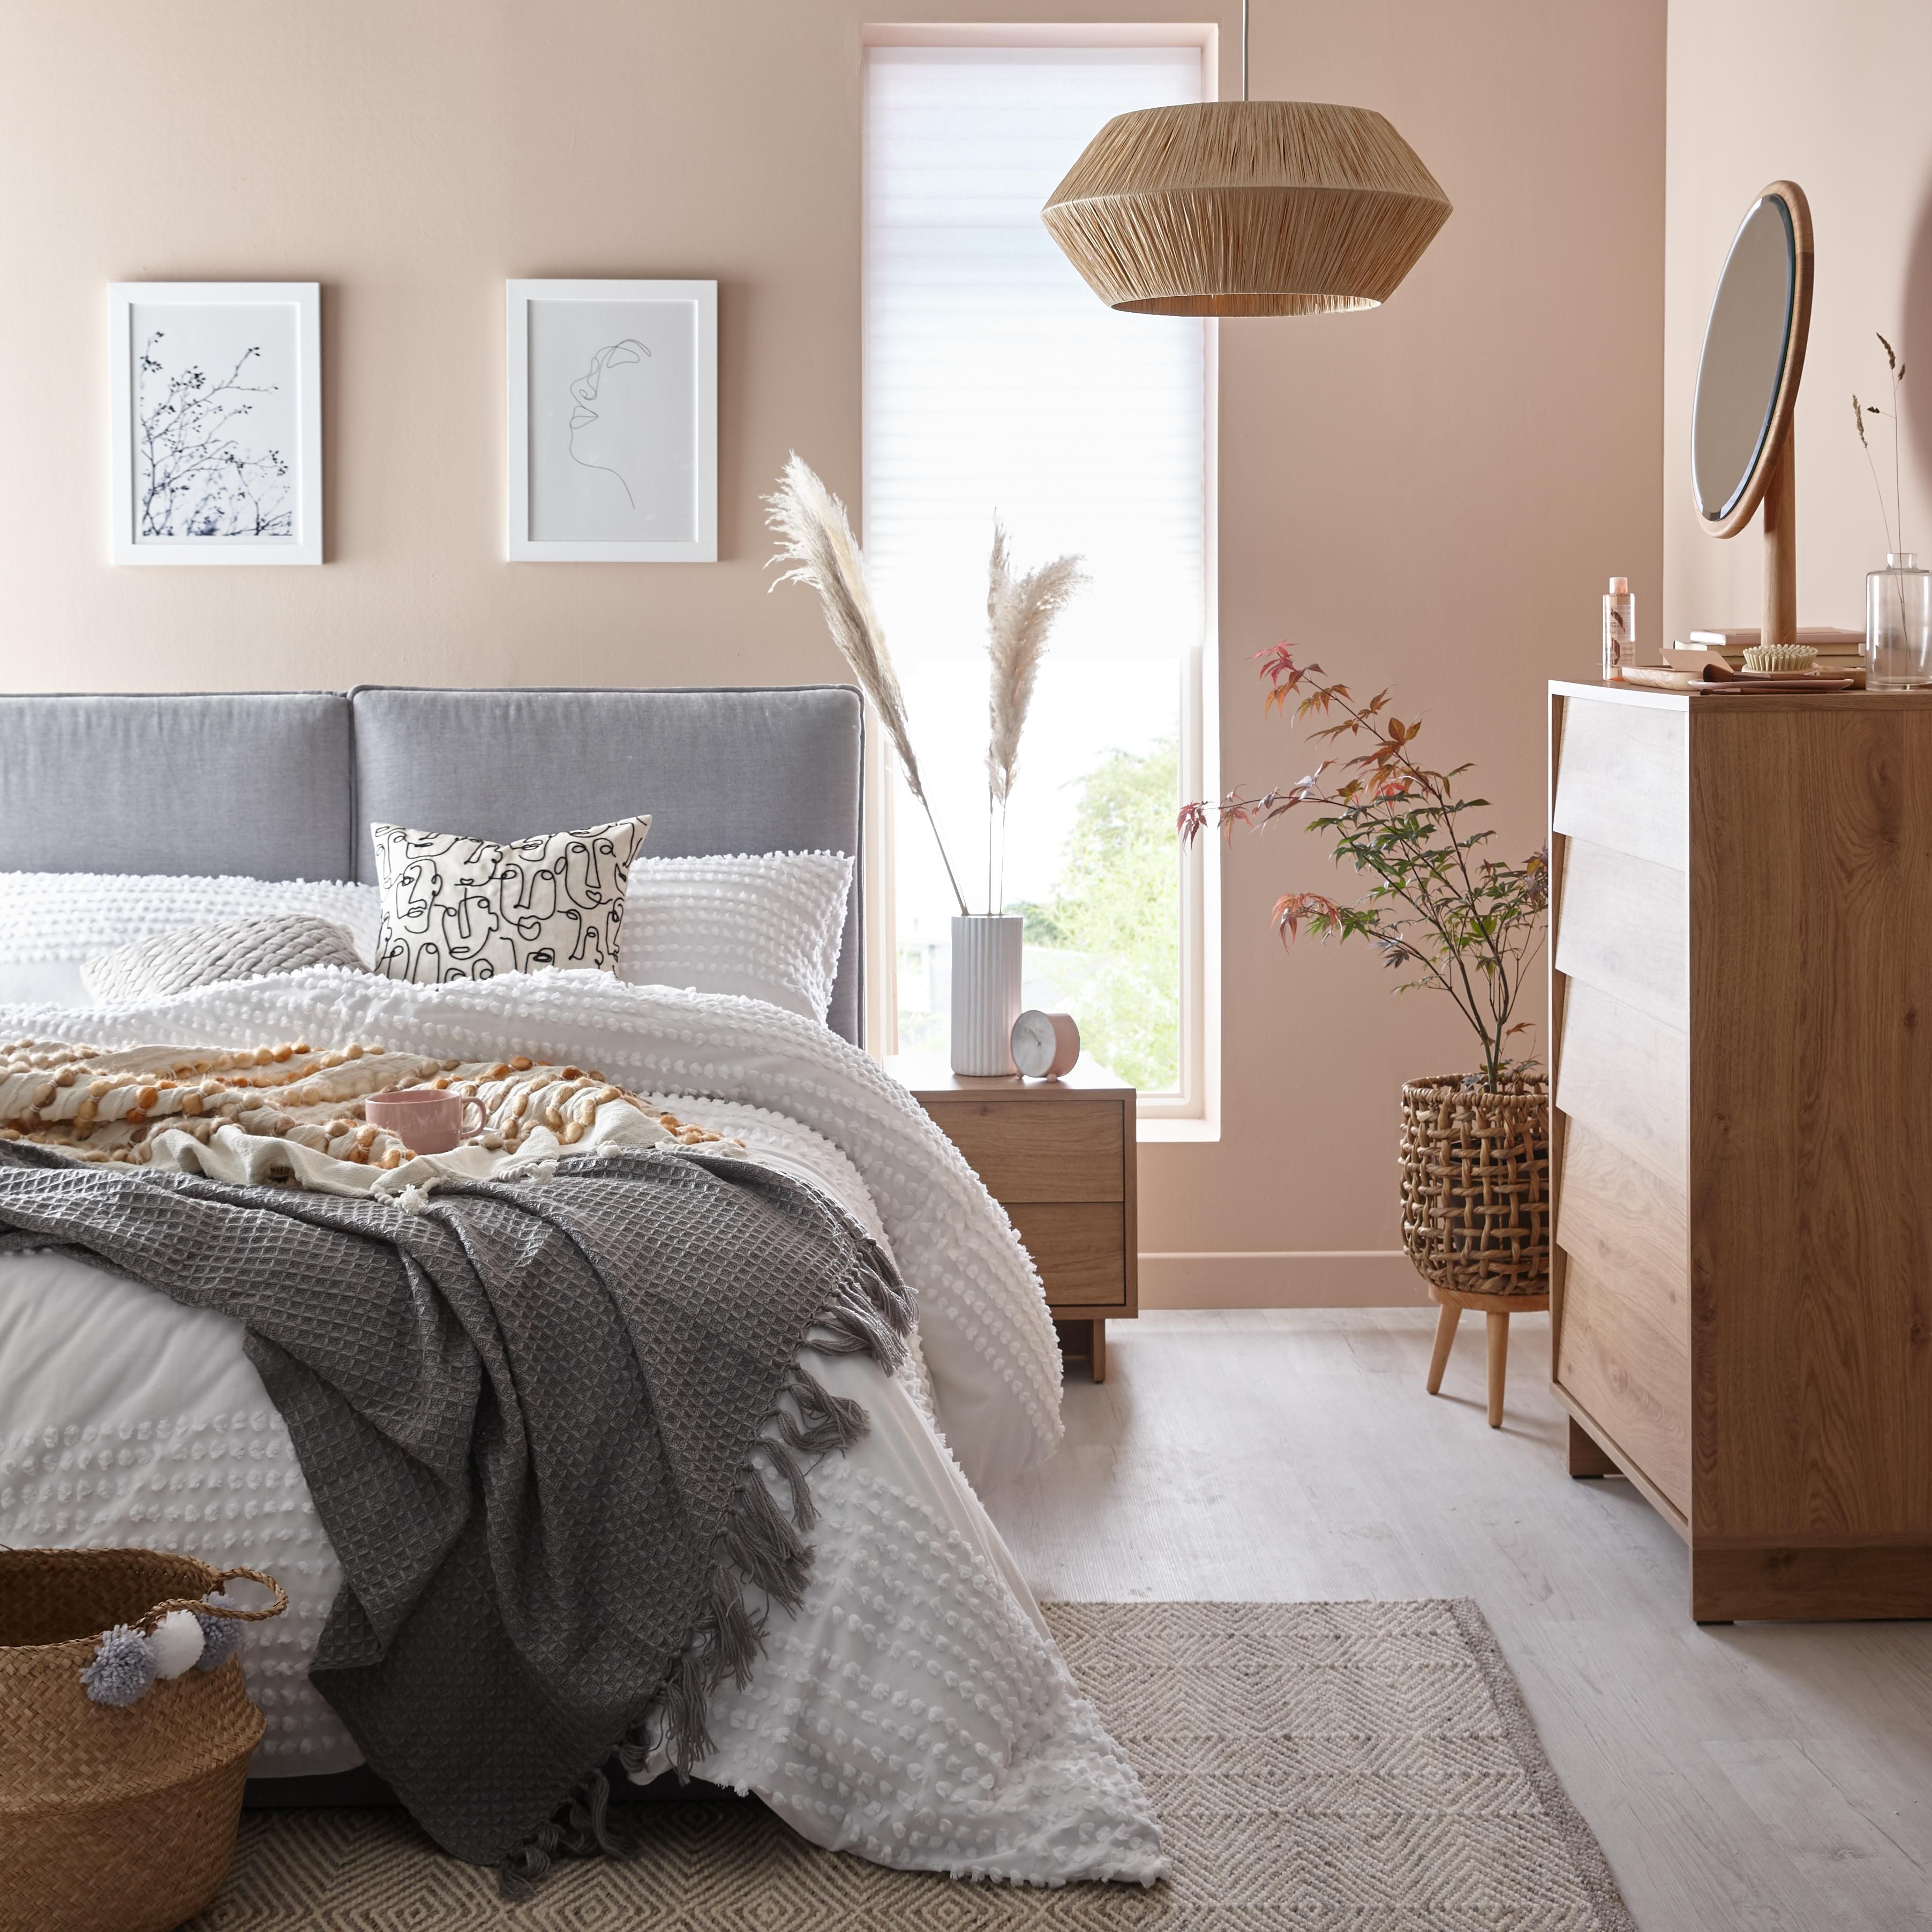 10 Cheap Ways To Transform Your Bedroom For Under £50